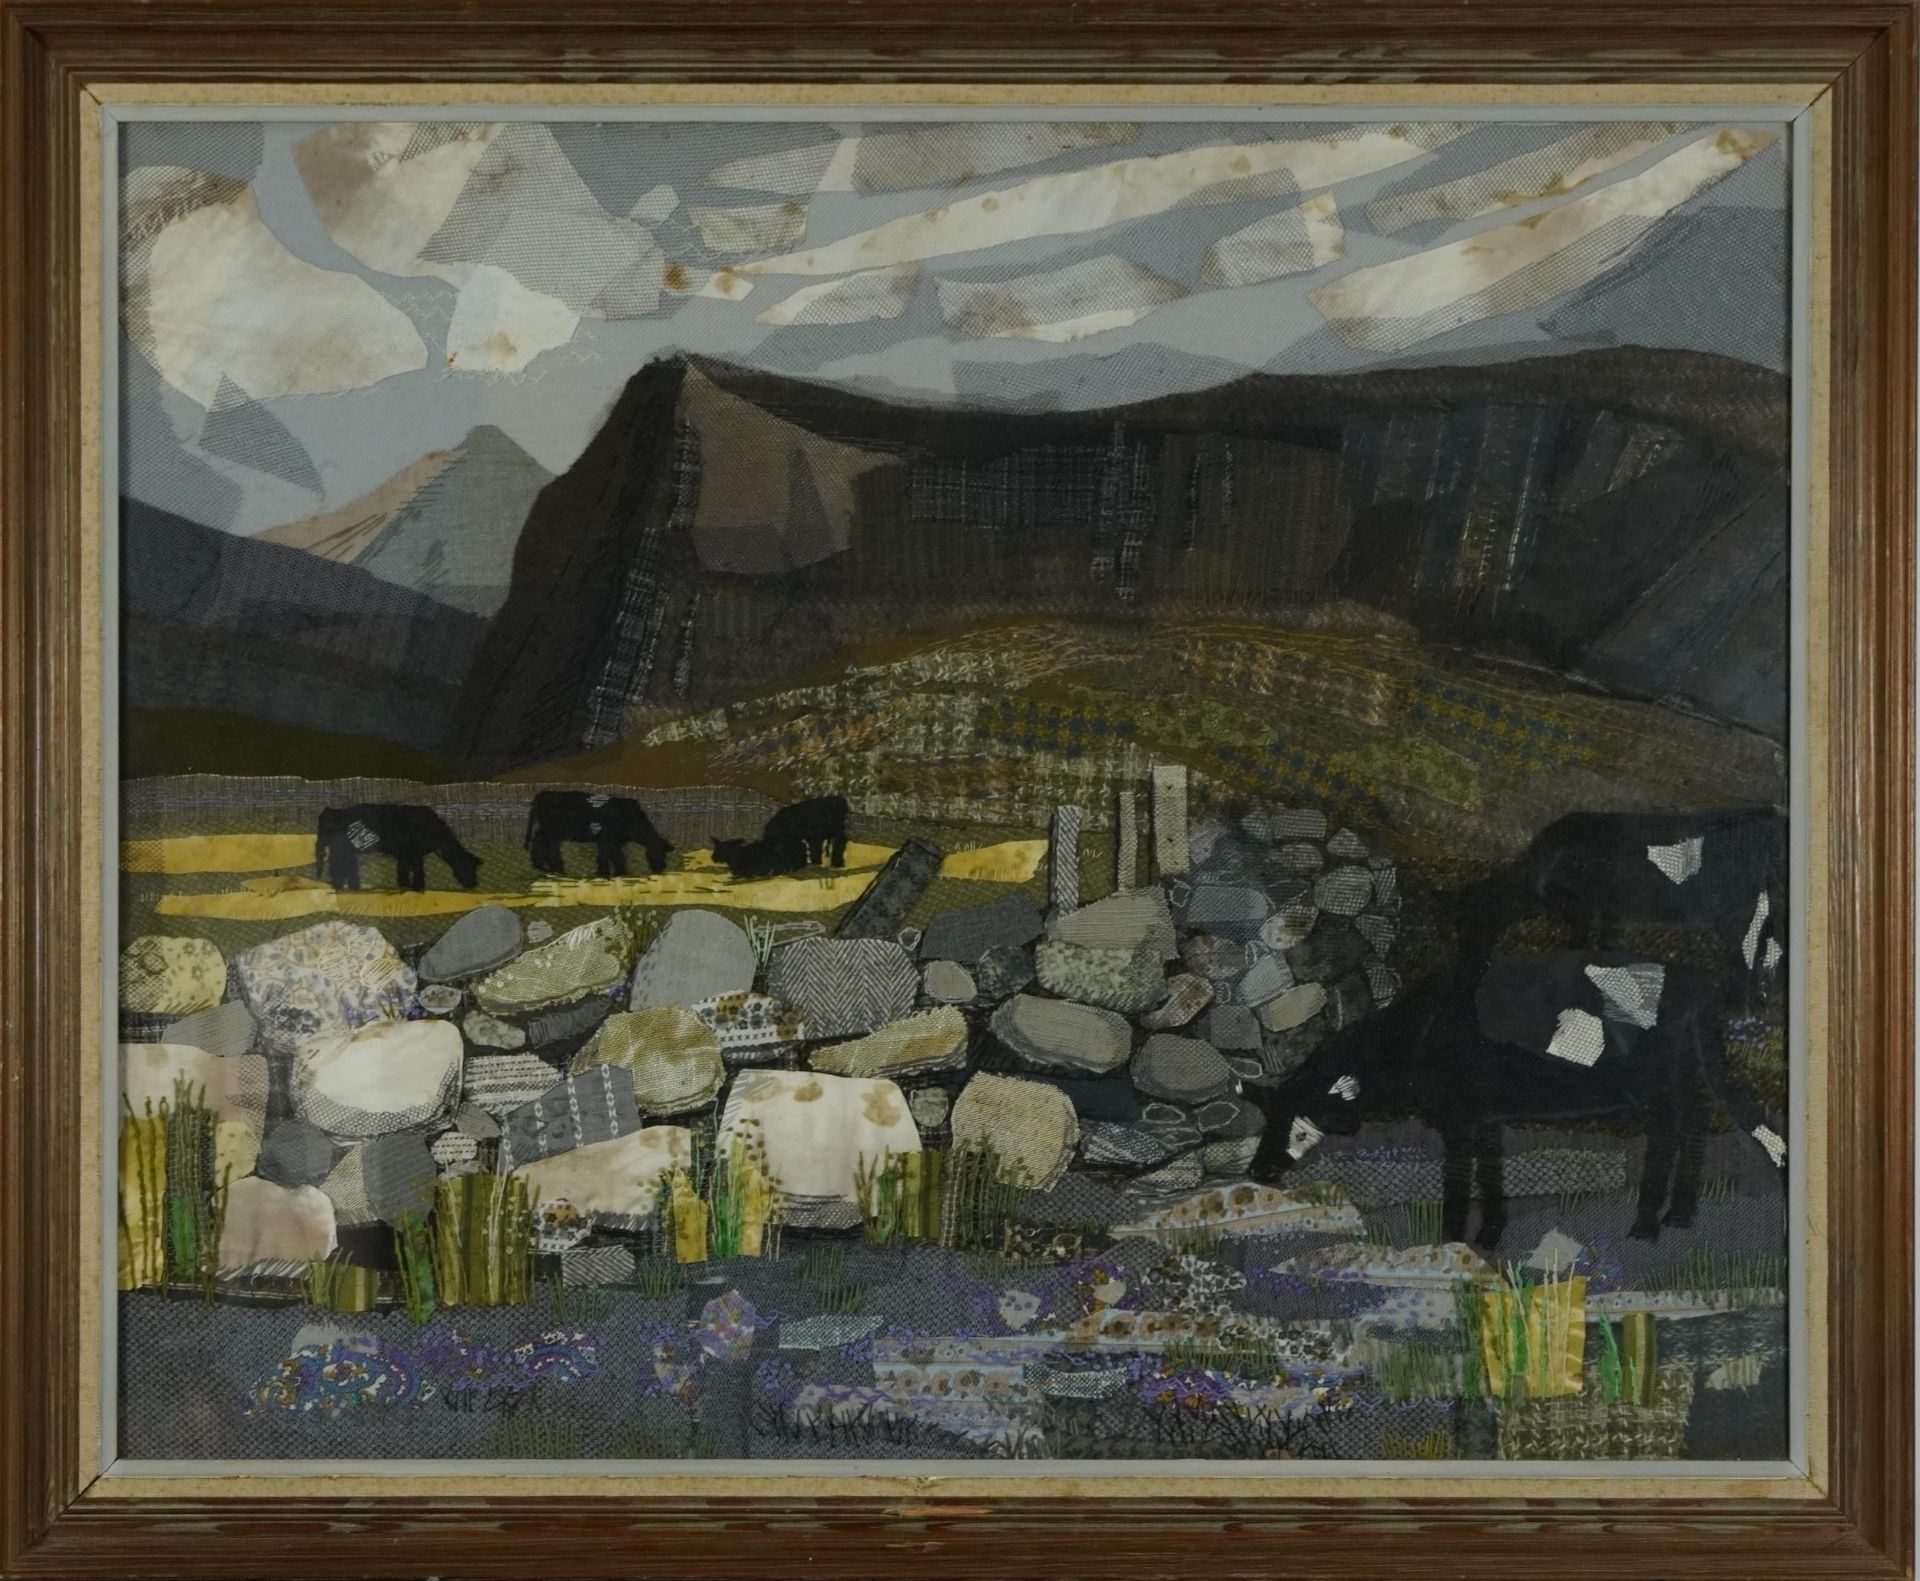 Juliet Wheeler - Welsh mountains, fabric collage numbered 6472 to the reverse, mounted, framed and - Image 2 of 3